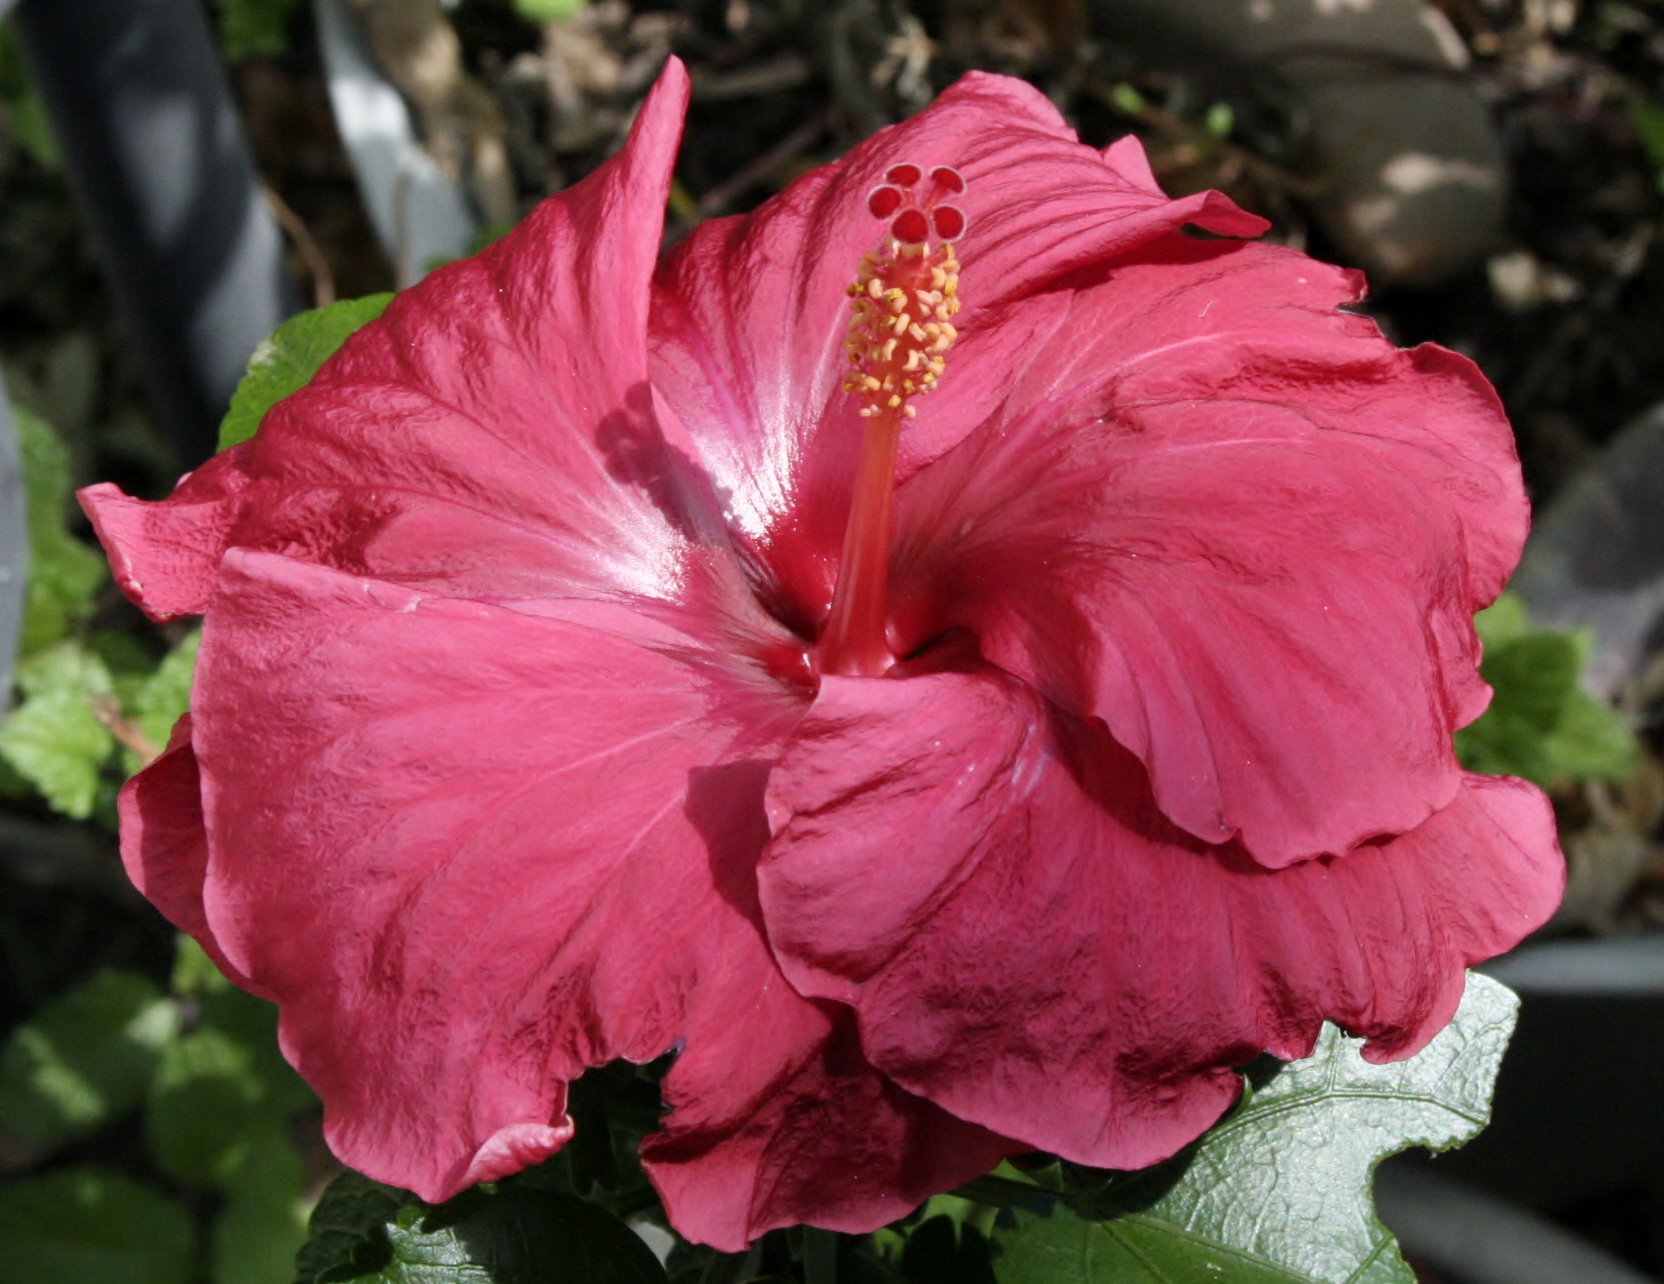 Red Hibiscus bloom.  crazyhorseladycx 2015 all rights reserved.